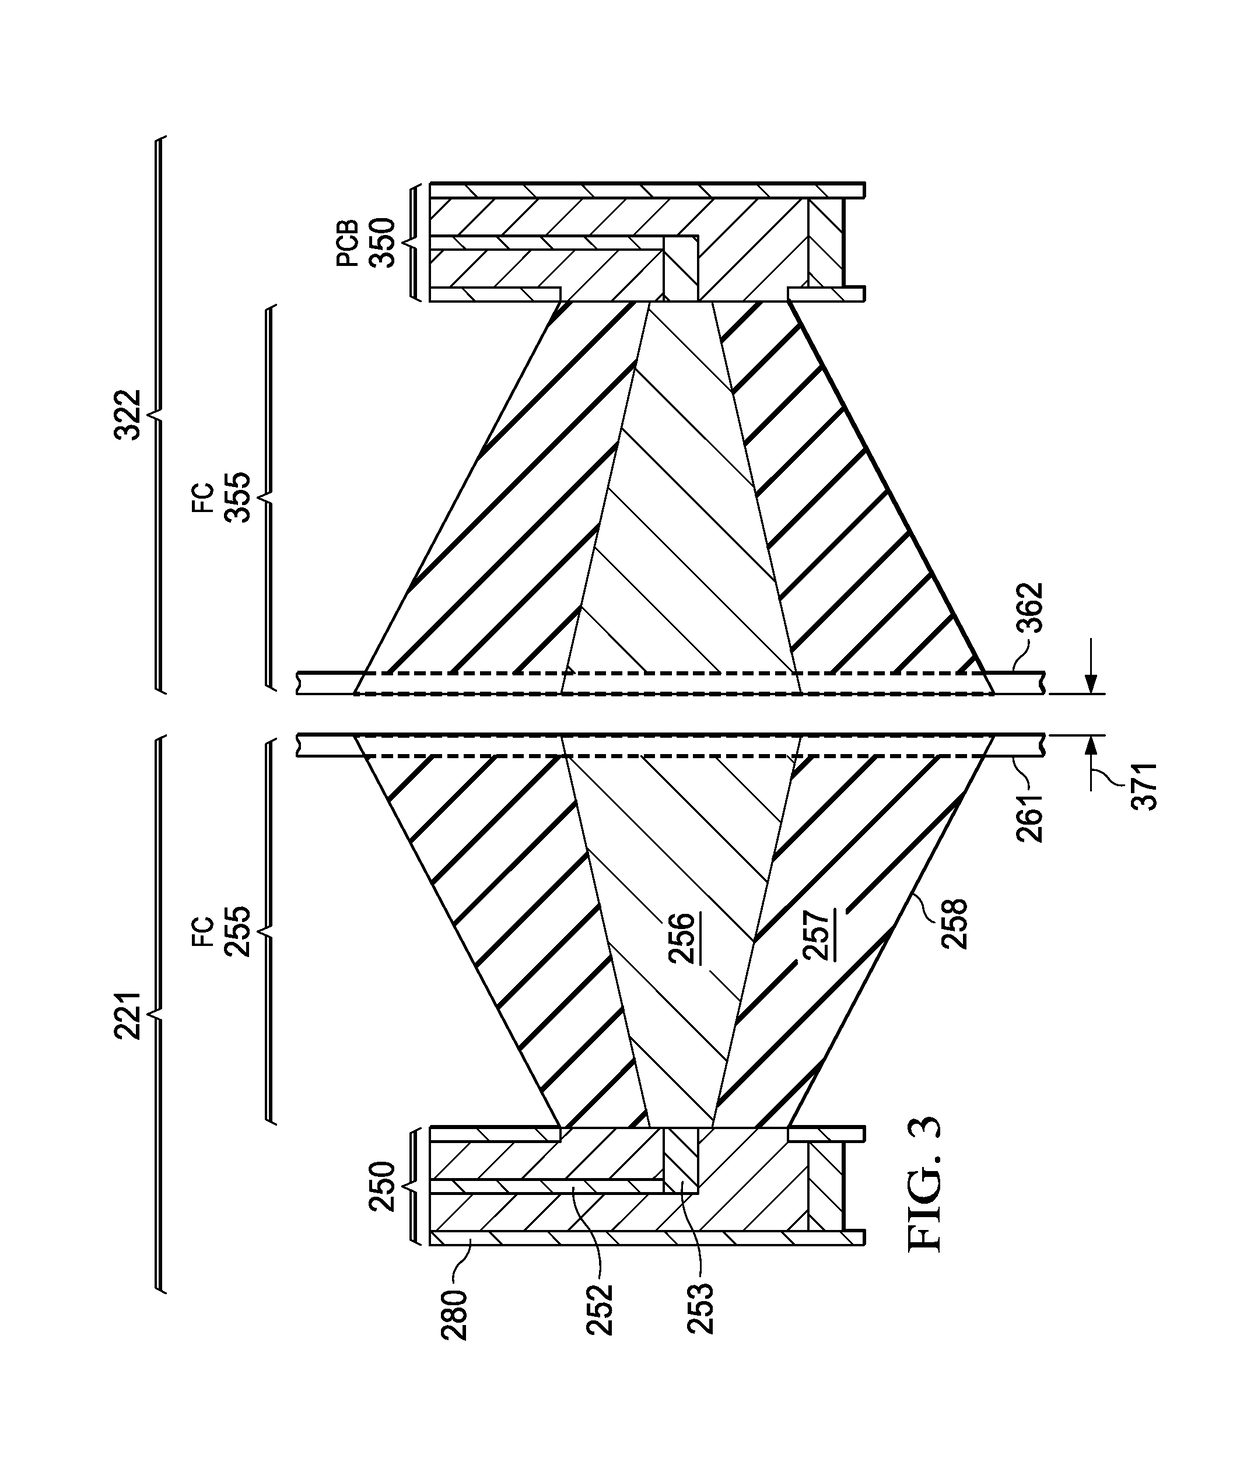 Tapered coax launch structure for a near field communication system